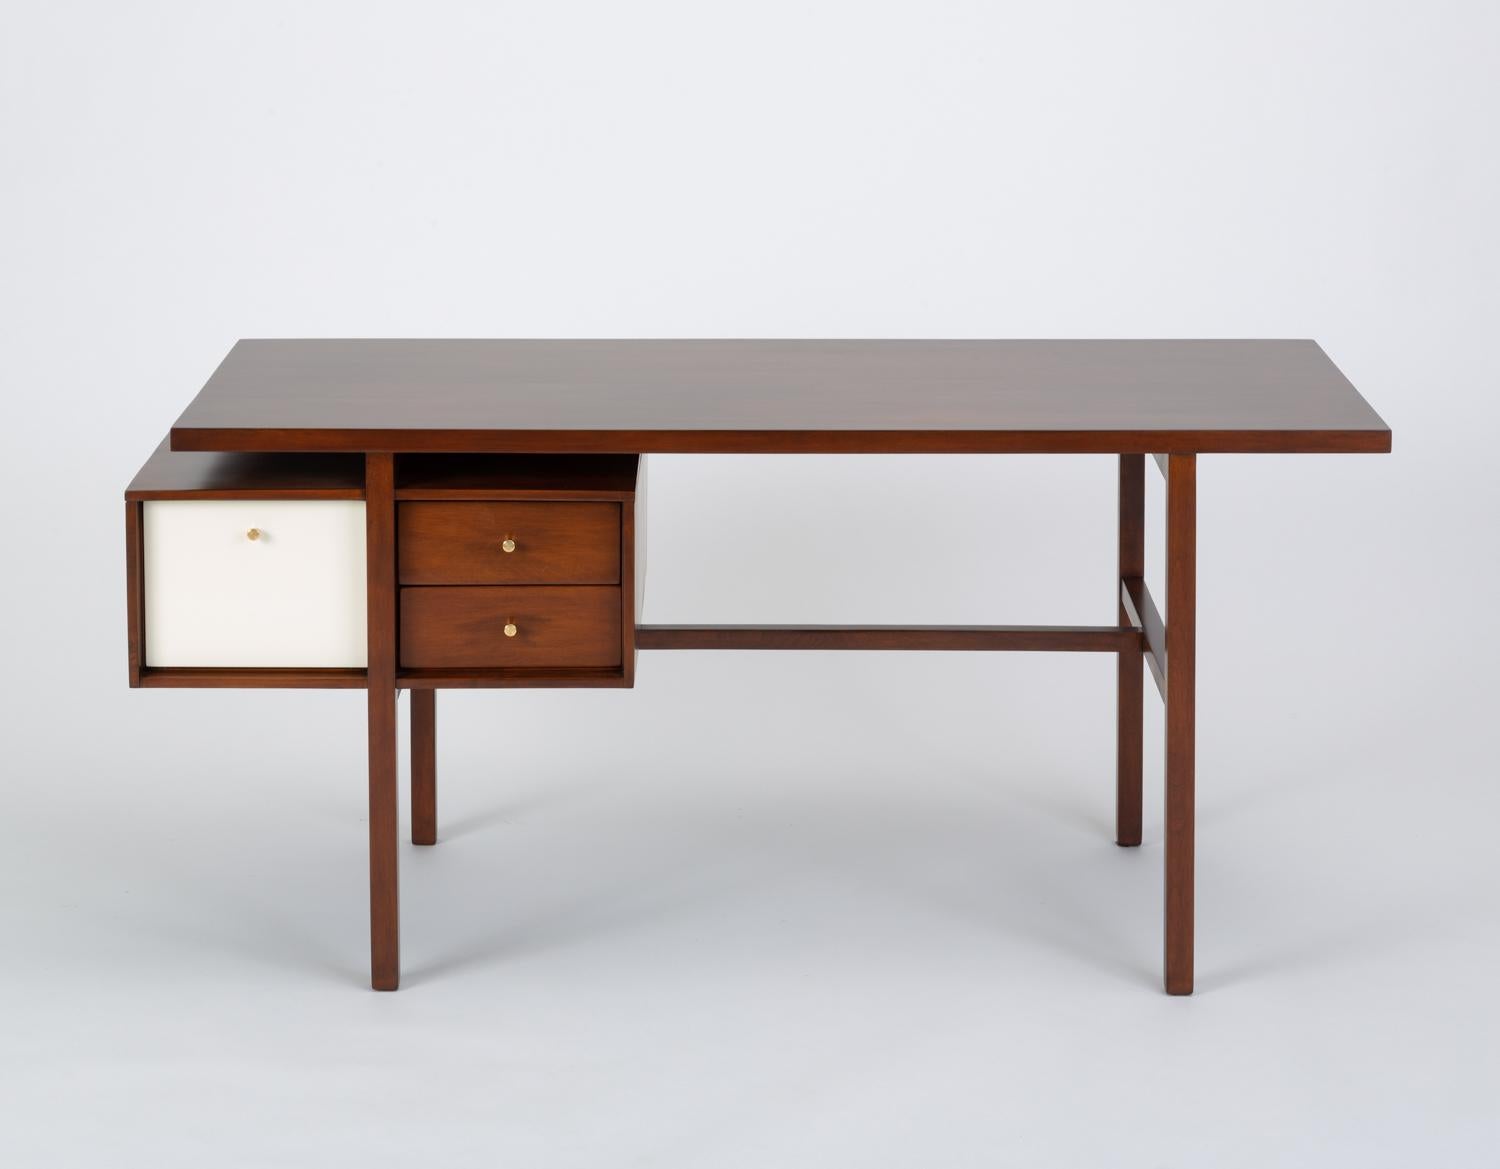 A California design from the early 1950s by Milo Baughman for Glenn of California has a delicate walnut frame in which an offset stack of three drawers appears to float. The deeper of the three drawers has a white laminate panel and all open with